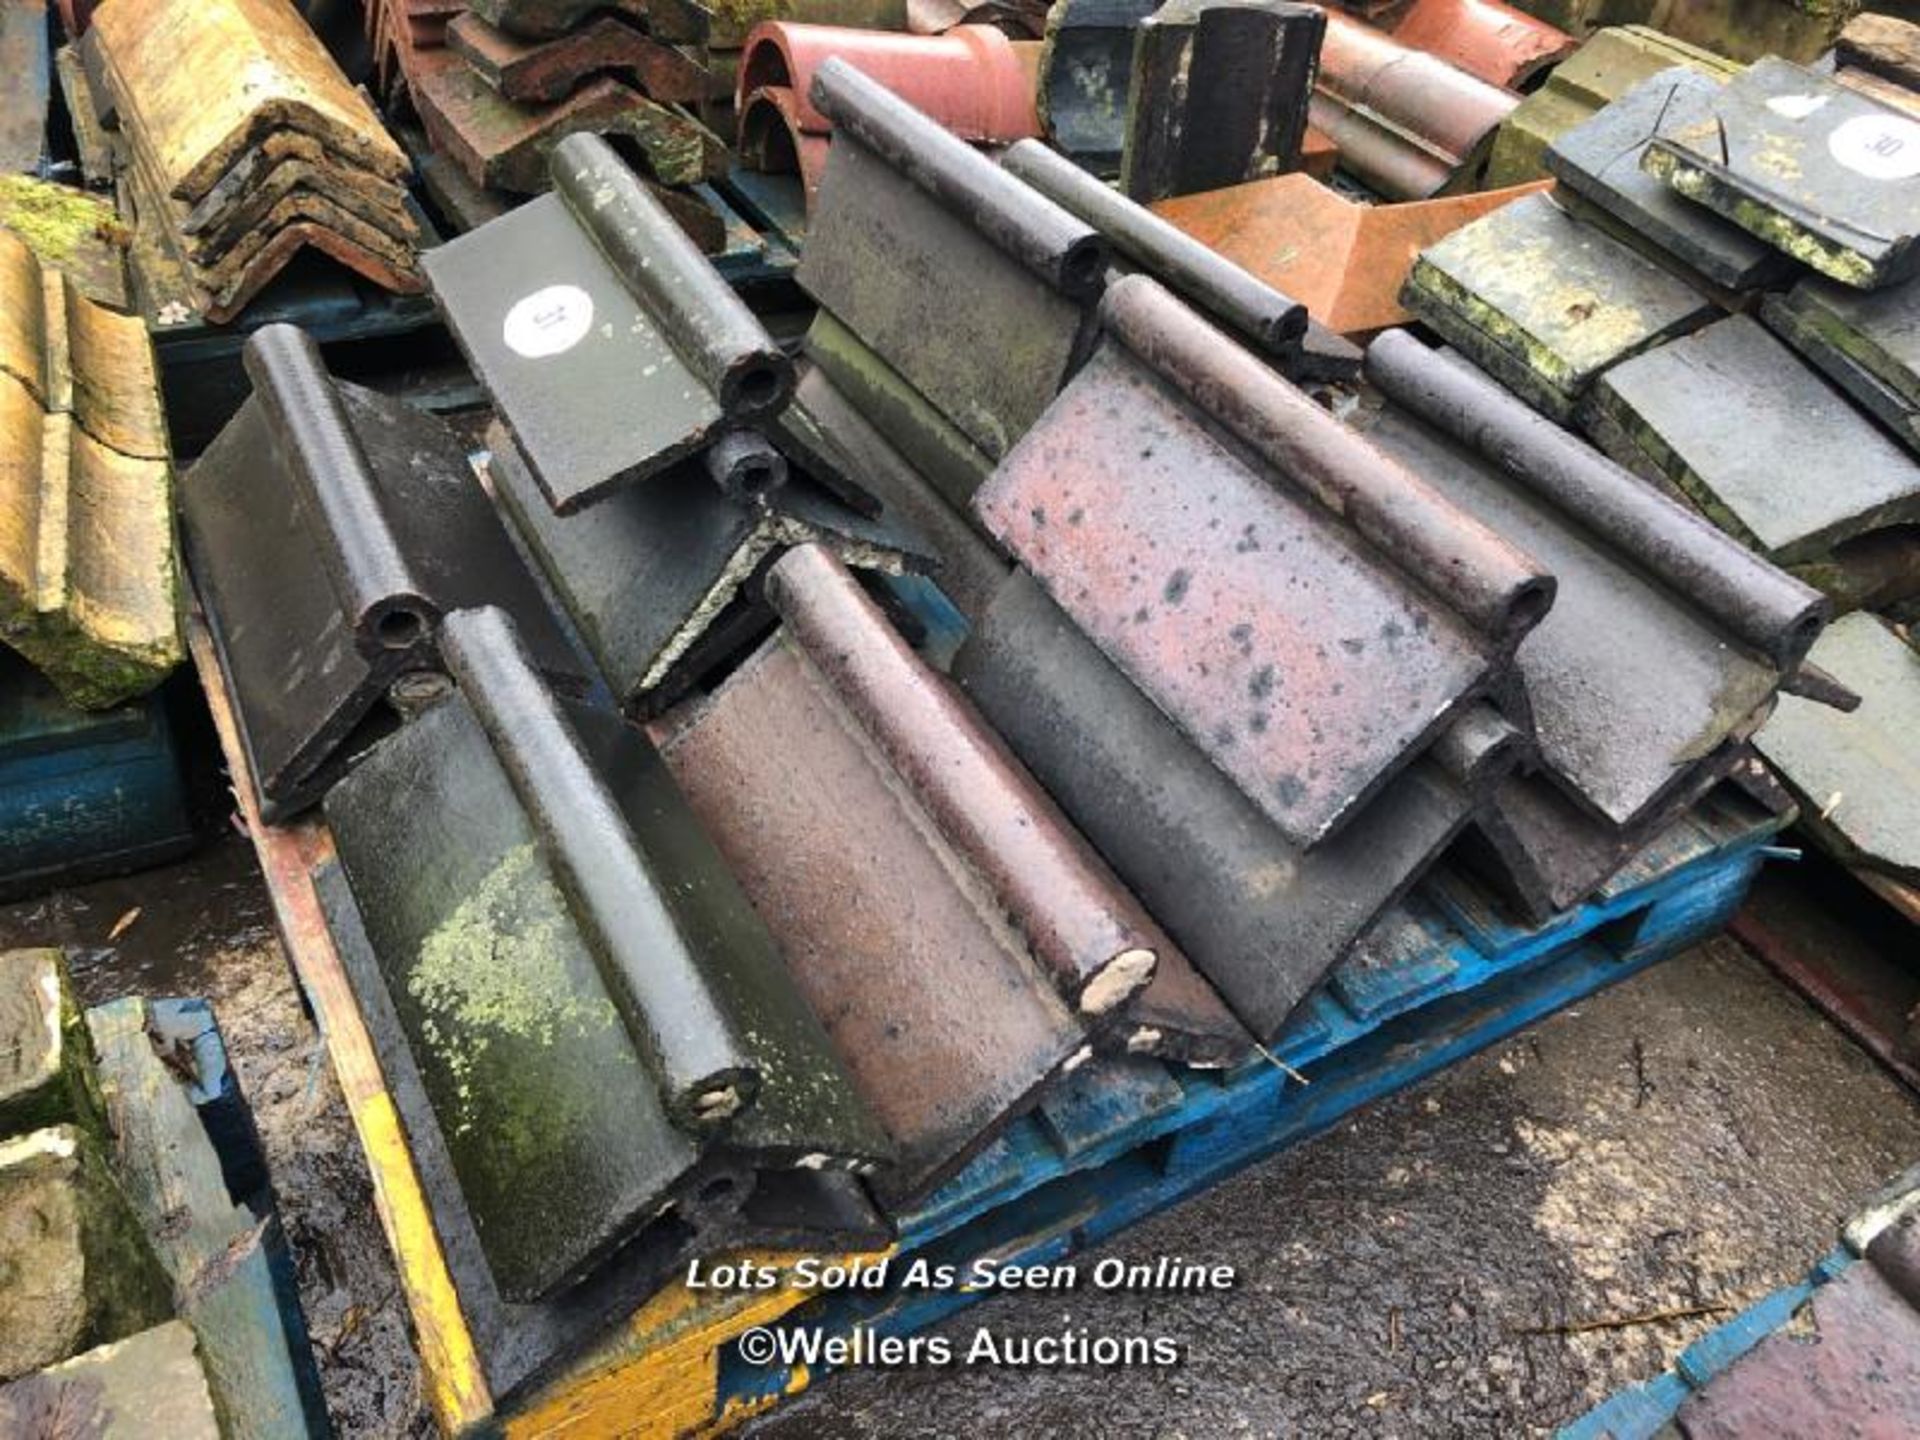 PALLET OF APPROX. 17X ASSORTED ROLL TOP RIDGE TILES, MIXED SIZES